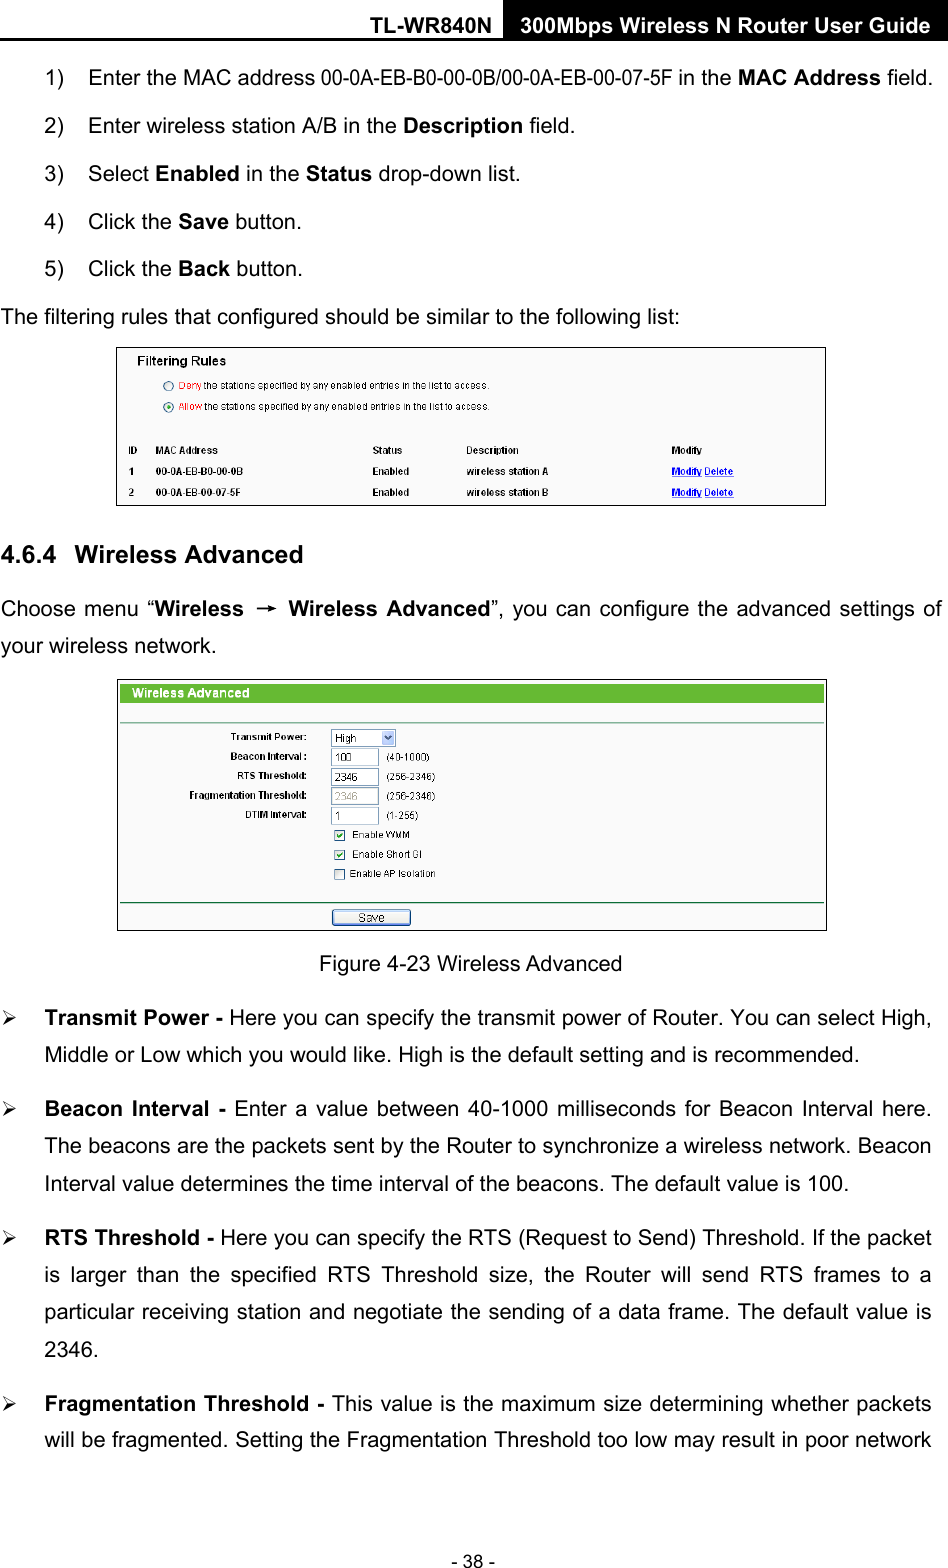 TL-WR840N 300Mbps Wireless N Router User Guide  - 38 - 1)  Enter the MAC address 00-0A-EB-B0-00-0B/00-0A-EB-00-07-5F in the MAC Address field. 2)  Enter wireless station A/B in the Description field. 3)  Select Enabled in the Status drop-down list. 4)  Click the Save button. 5) Click the Back button. The filtering rules that configured should be similar to the following list:  4.6.4 Wireless Advanced Choose menu “Wireless → Wireless Advanced”, you can configure the advanced settings of your wireless network.  Figure 4-23 Wireless Advanced  Transmit Power - Here you can specify the transmit power of Router. You can select High, Middle or Low which you would like. High is the default setting and is recommended.  Beacon Interval -  Enter a value between 40-1000 milliseconds for Beacon Interval here. The beacons are the packets sent by the Router to synchronize a wireless network. Beacon Interval value determines the time interval of the beacons. The default value is 100.    RTS Threshold - Here you can specify the RTS (Request to Send) Threshold. If the packet is larger than the specified RTS Threshold size, the Router will send RTS frames to a particular receiving station and negotiate the sending of a data frame. The default value is 2346.    Fragmentation Threshold - This value is the maximum size determining whether packets will be fragmented. Setting the Fragmentation Threshold too low may result in poor network 